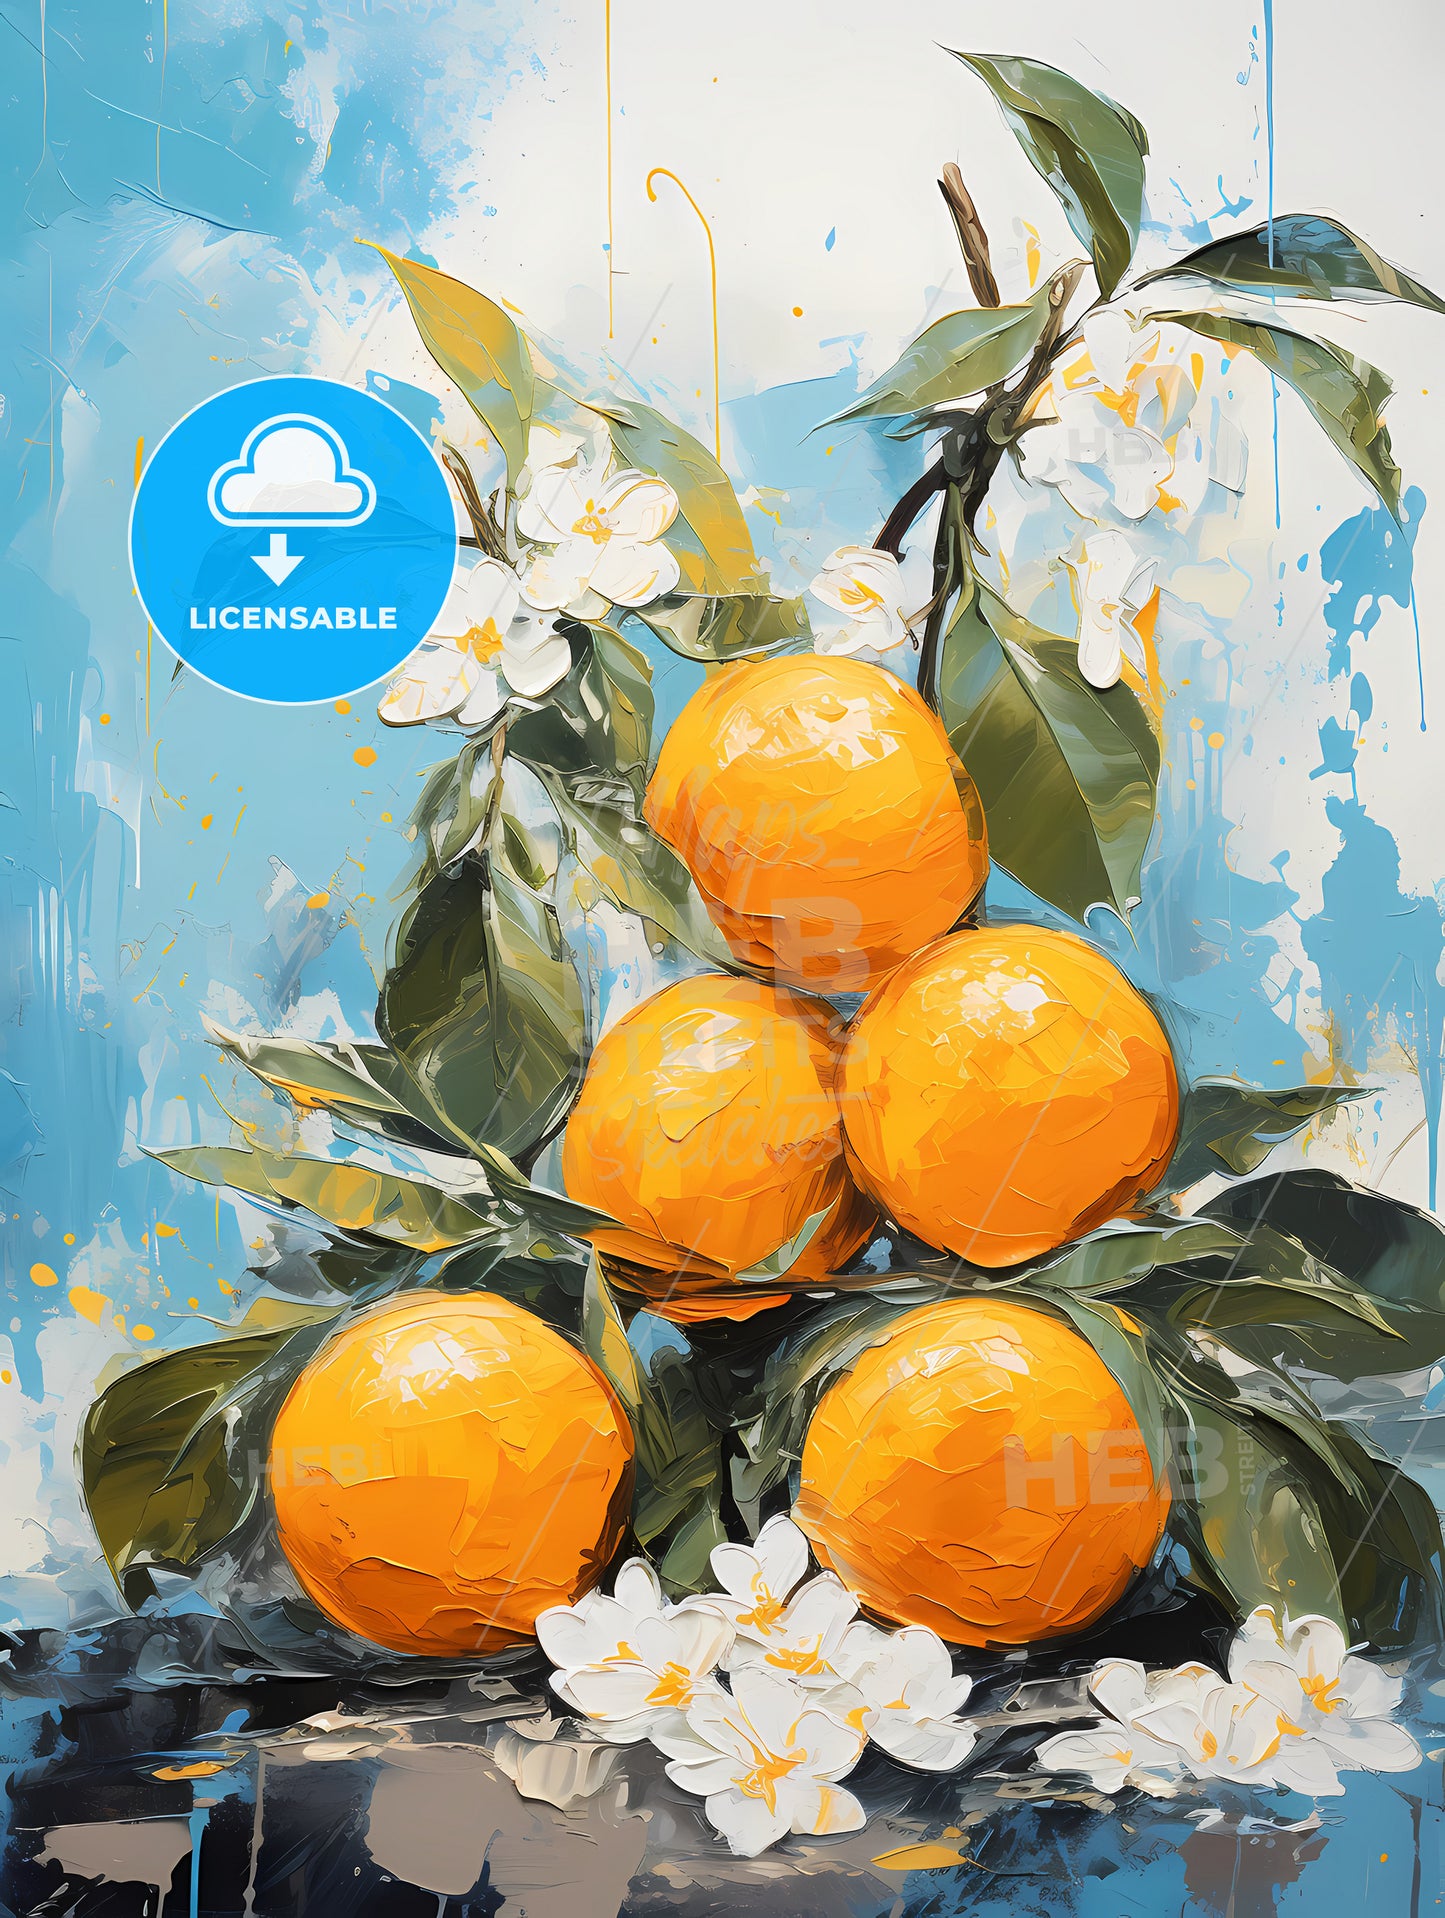 A Painting Of Oranges On A Branch With White Flowers